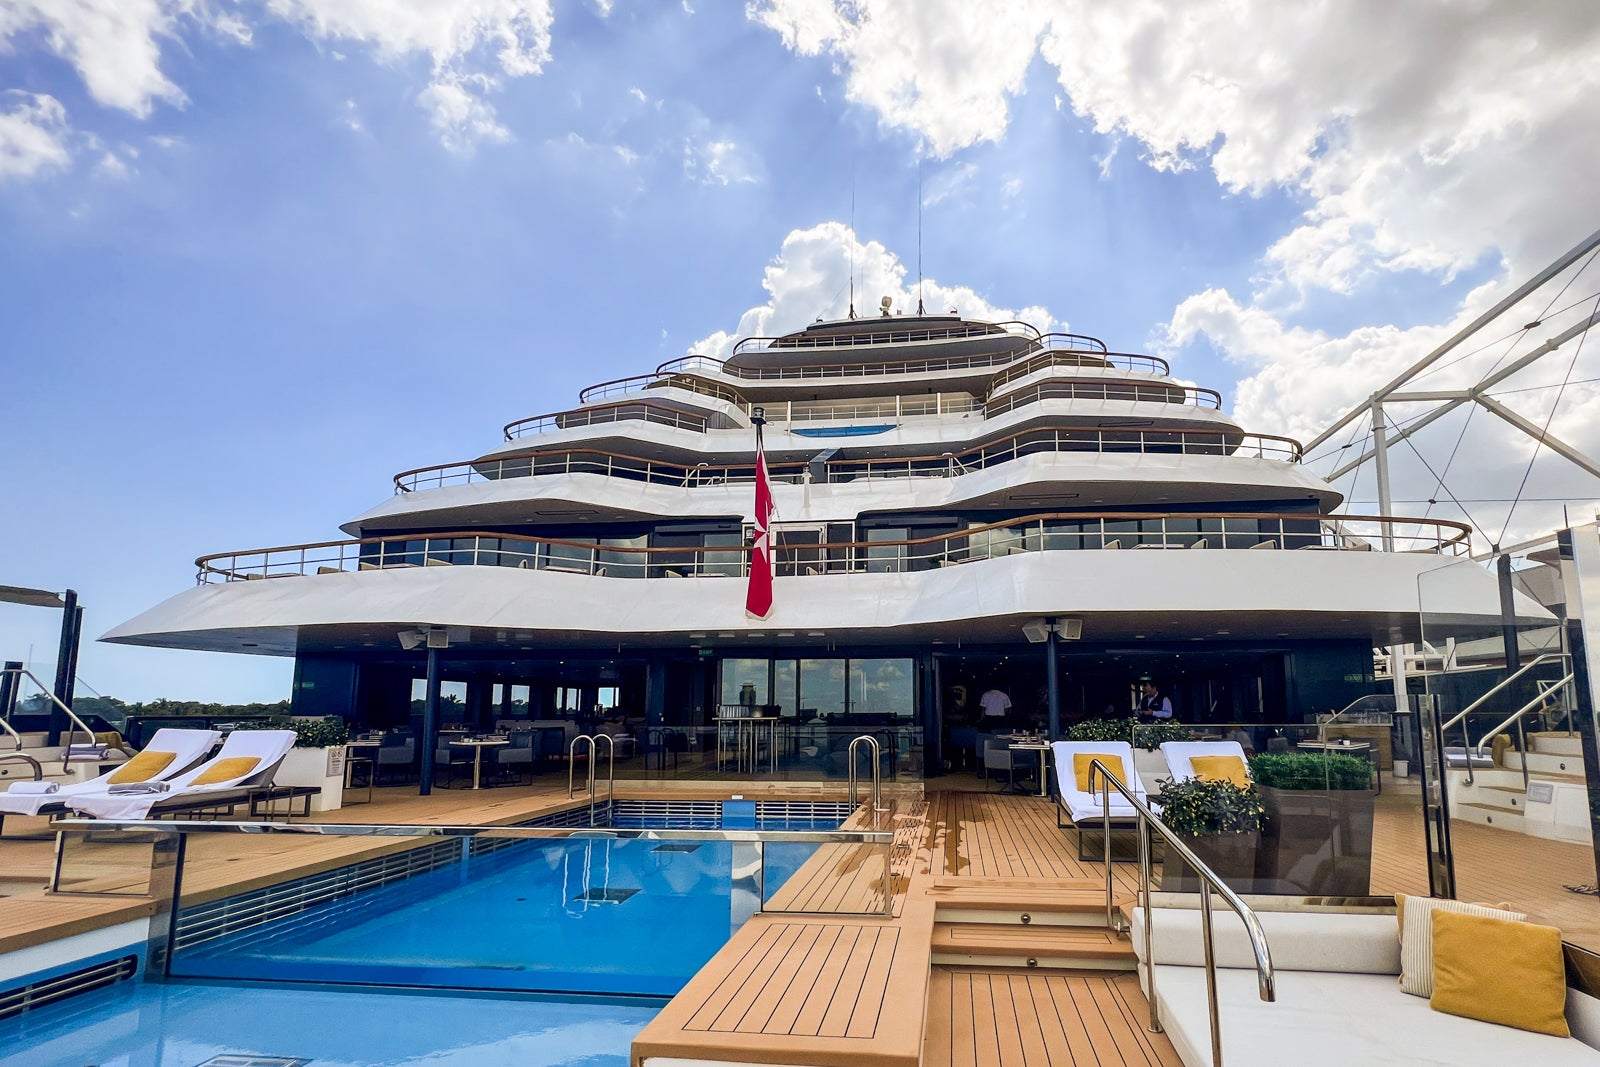 Pool deck of The Ritz-Carlton Yacht Collection's Evrima.